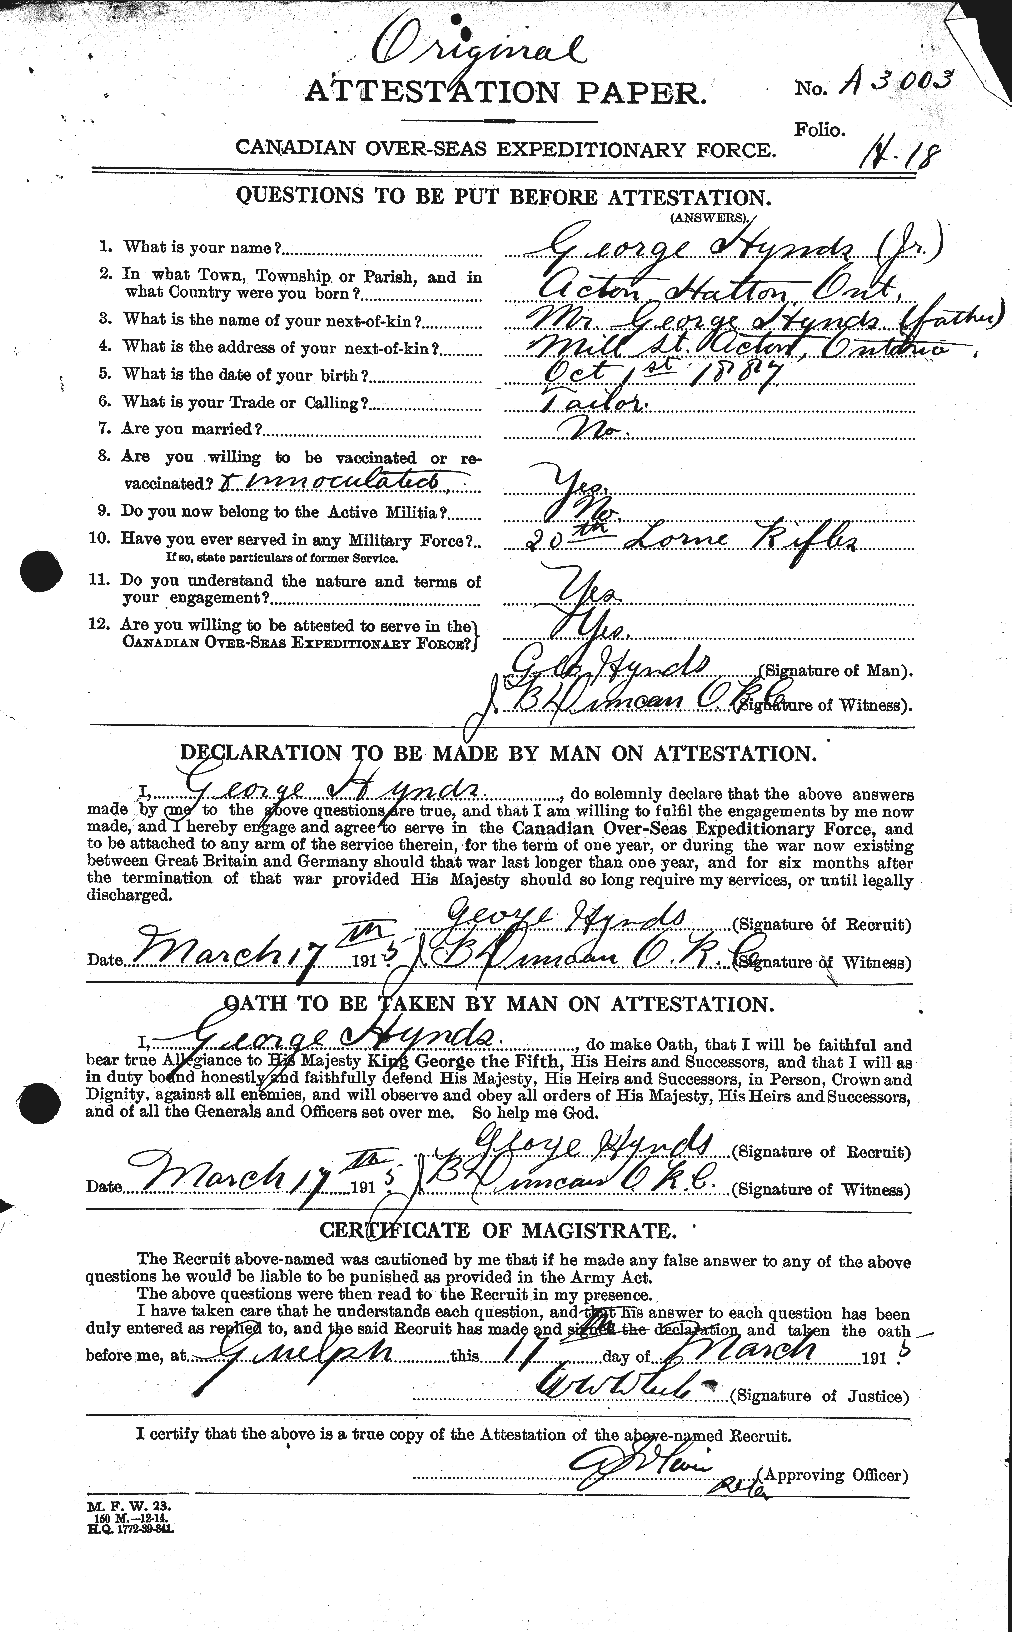 Personnel Records of the First World War - CEF 411515a